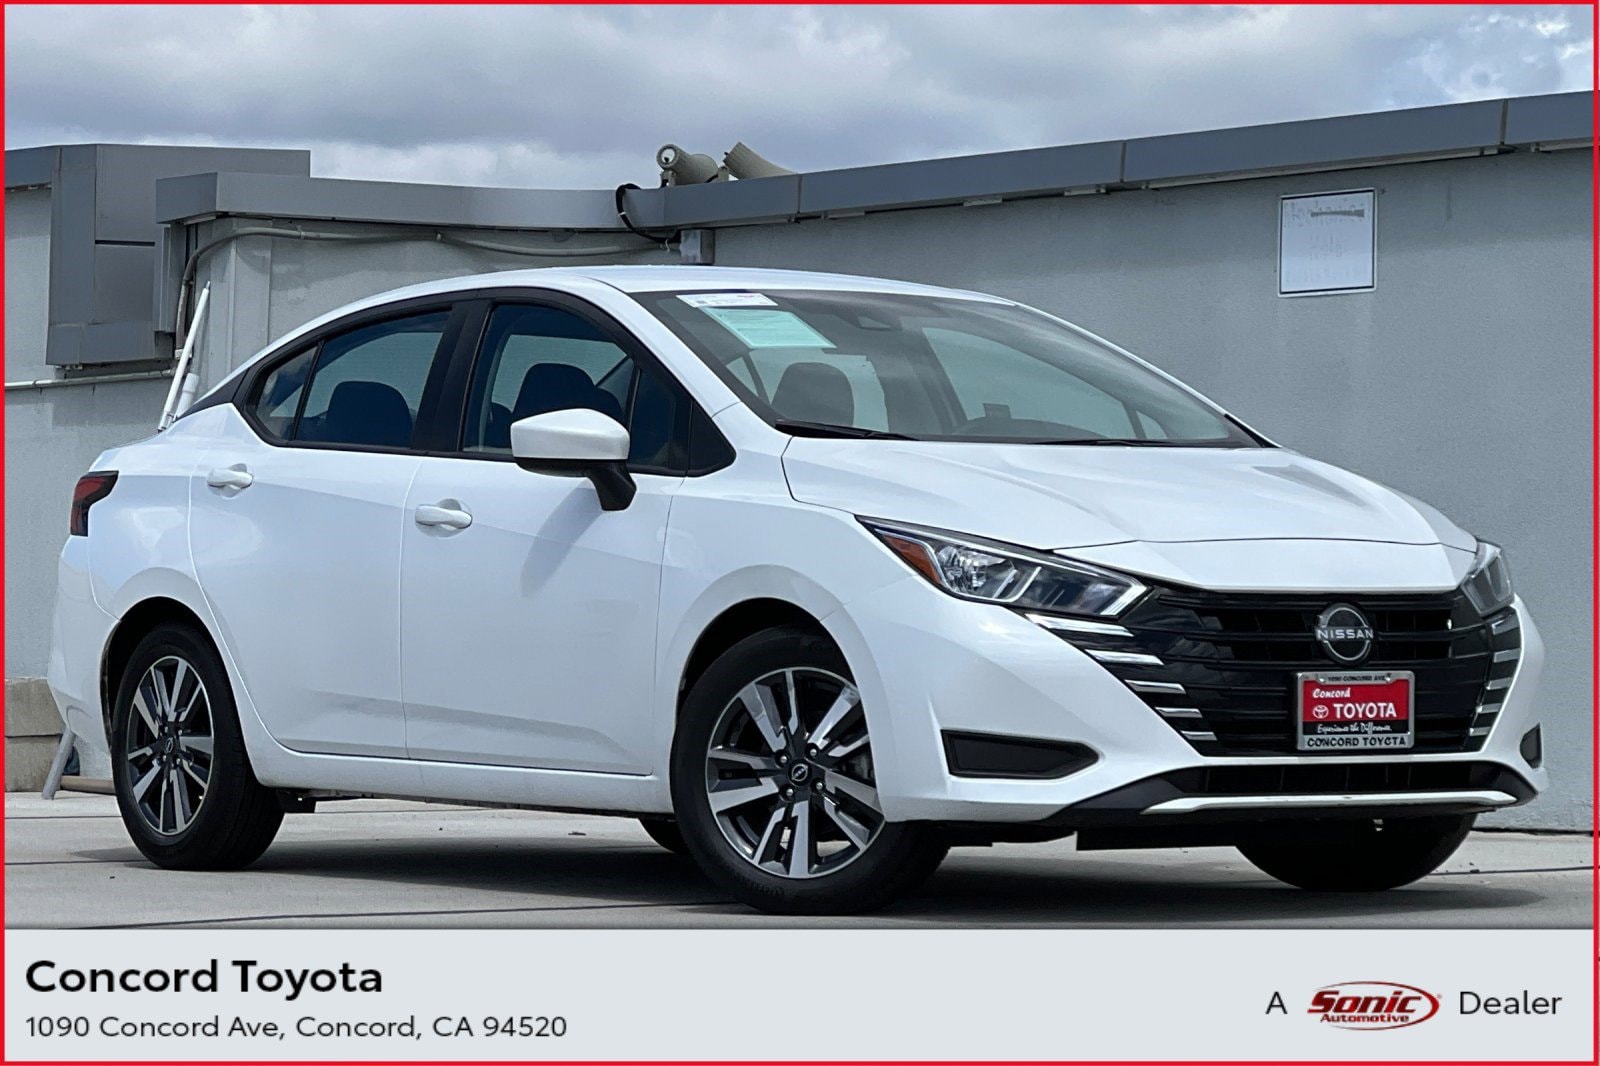 font color=black>Pre-Owned Specials</font> | Concord Toyota